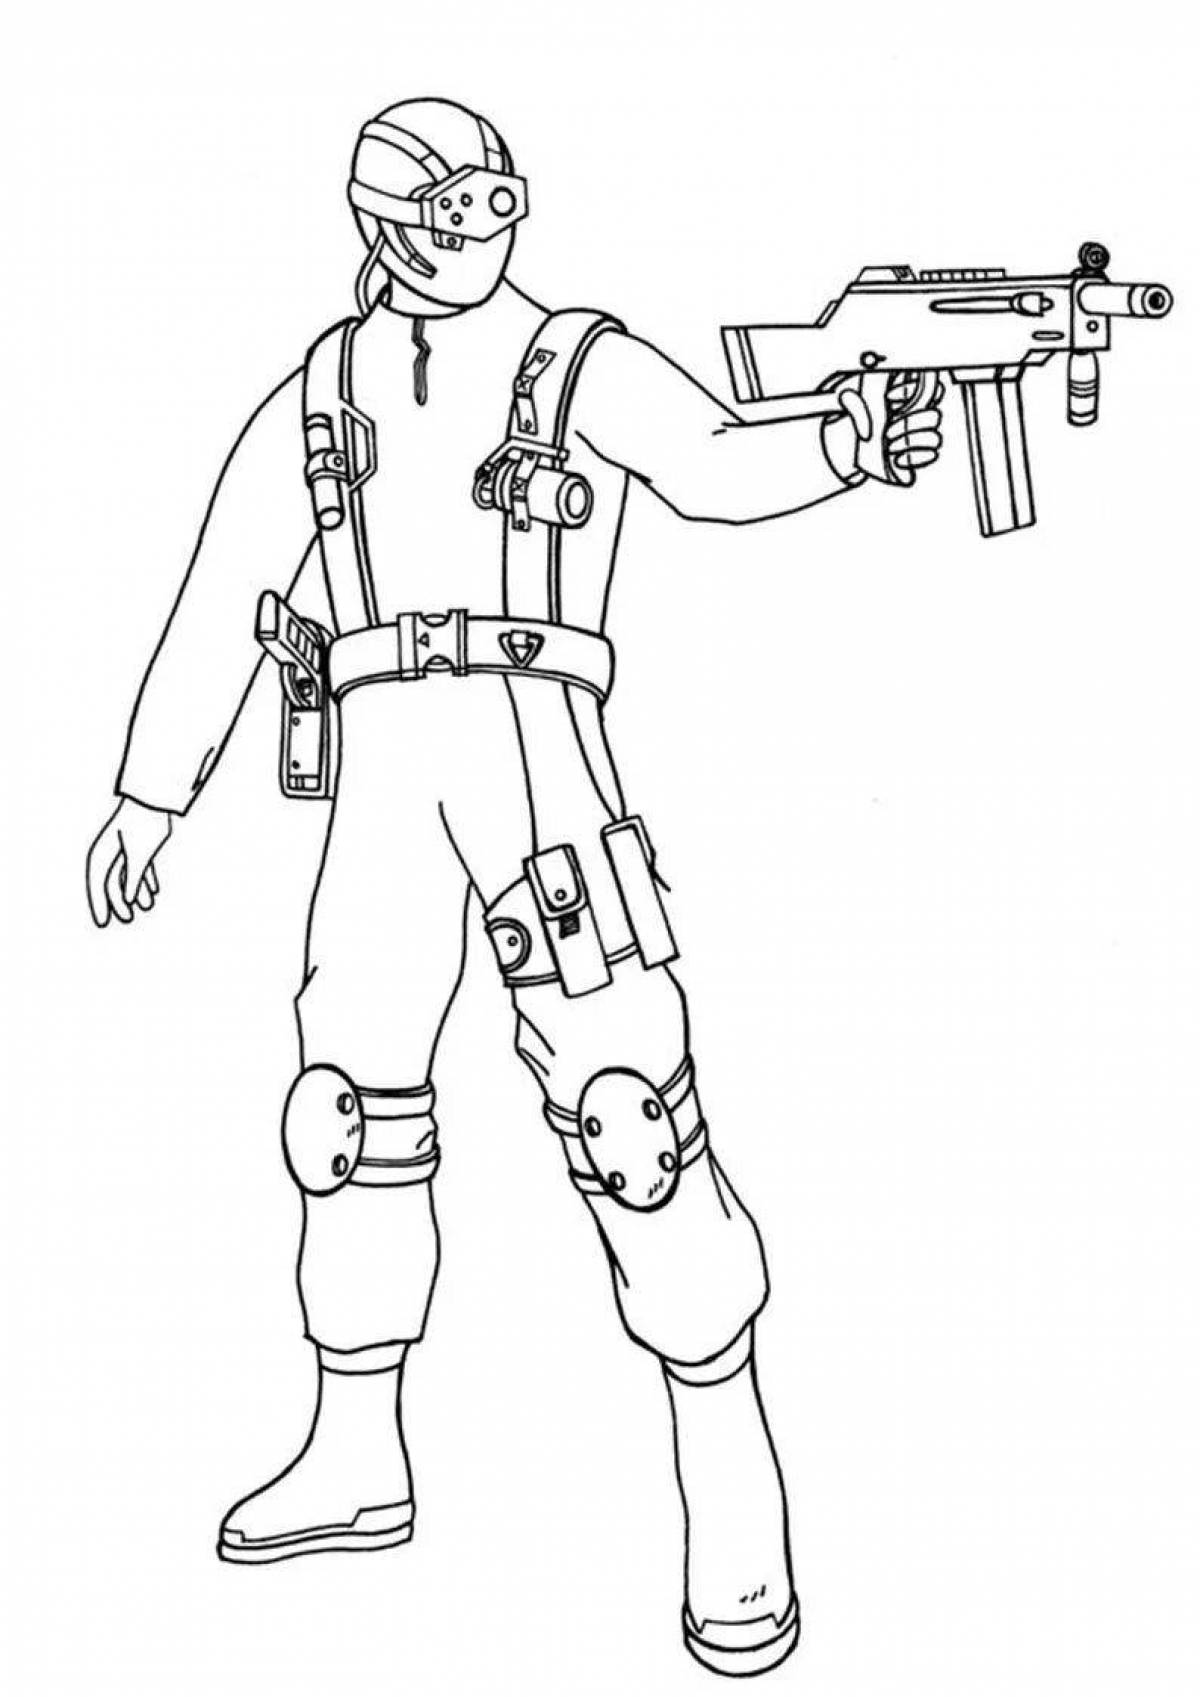 Charming counter strike coloring book